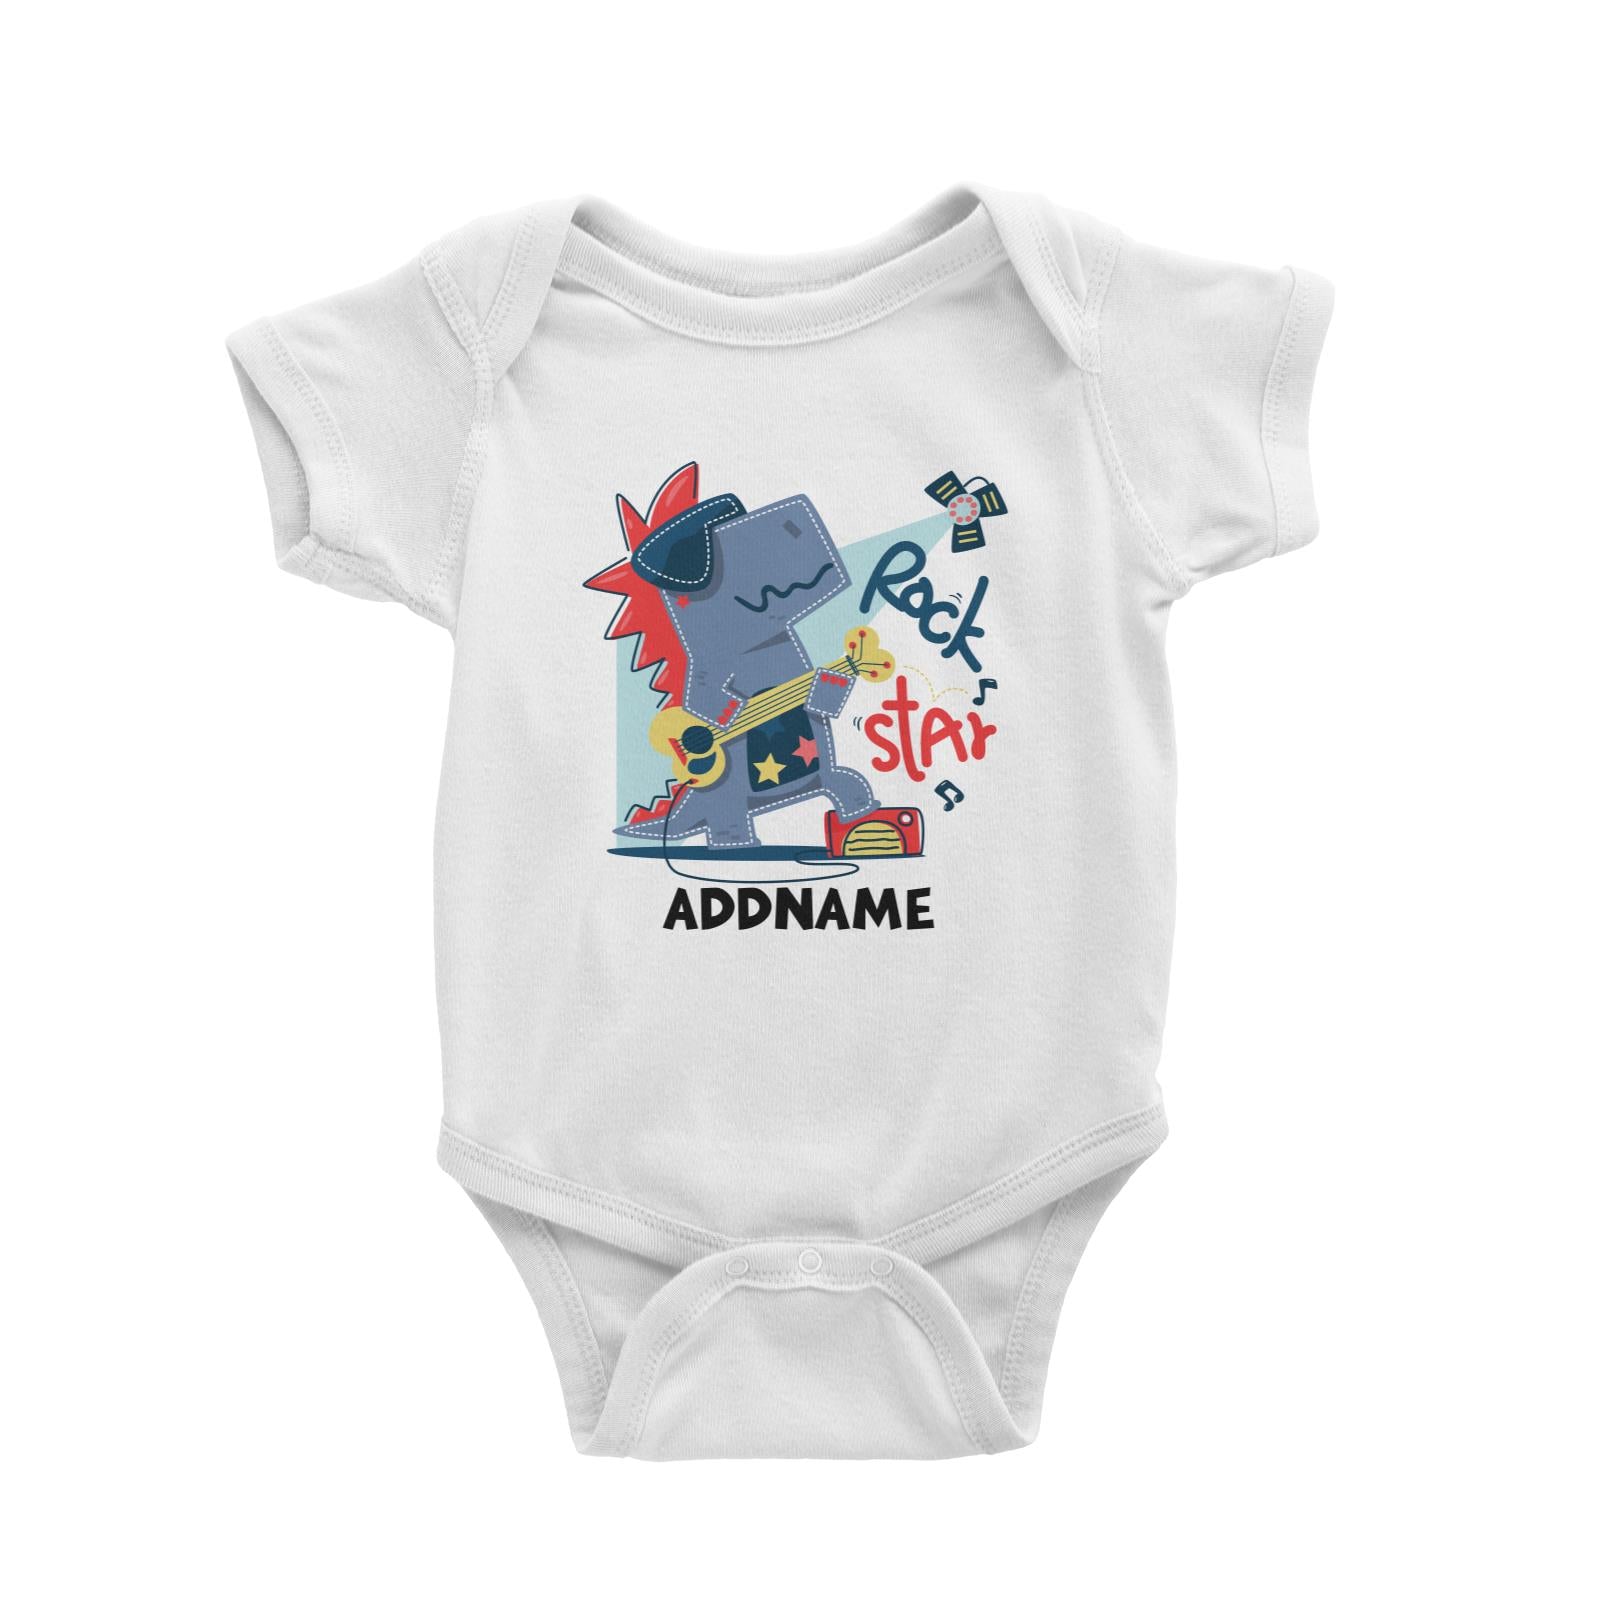 Rock Star Dinosaur with Guitar Addname White Baby Romper